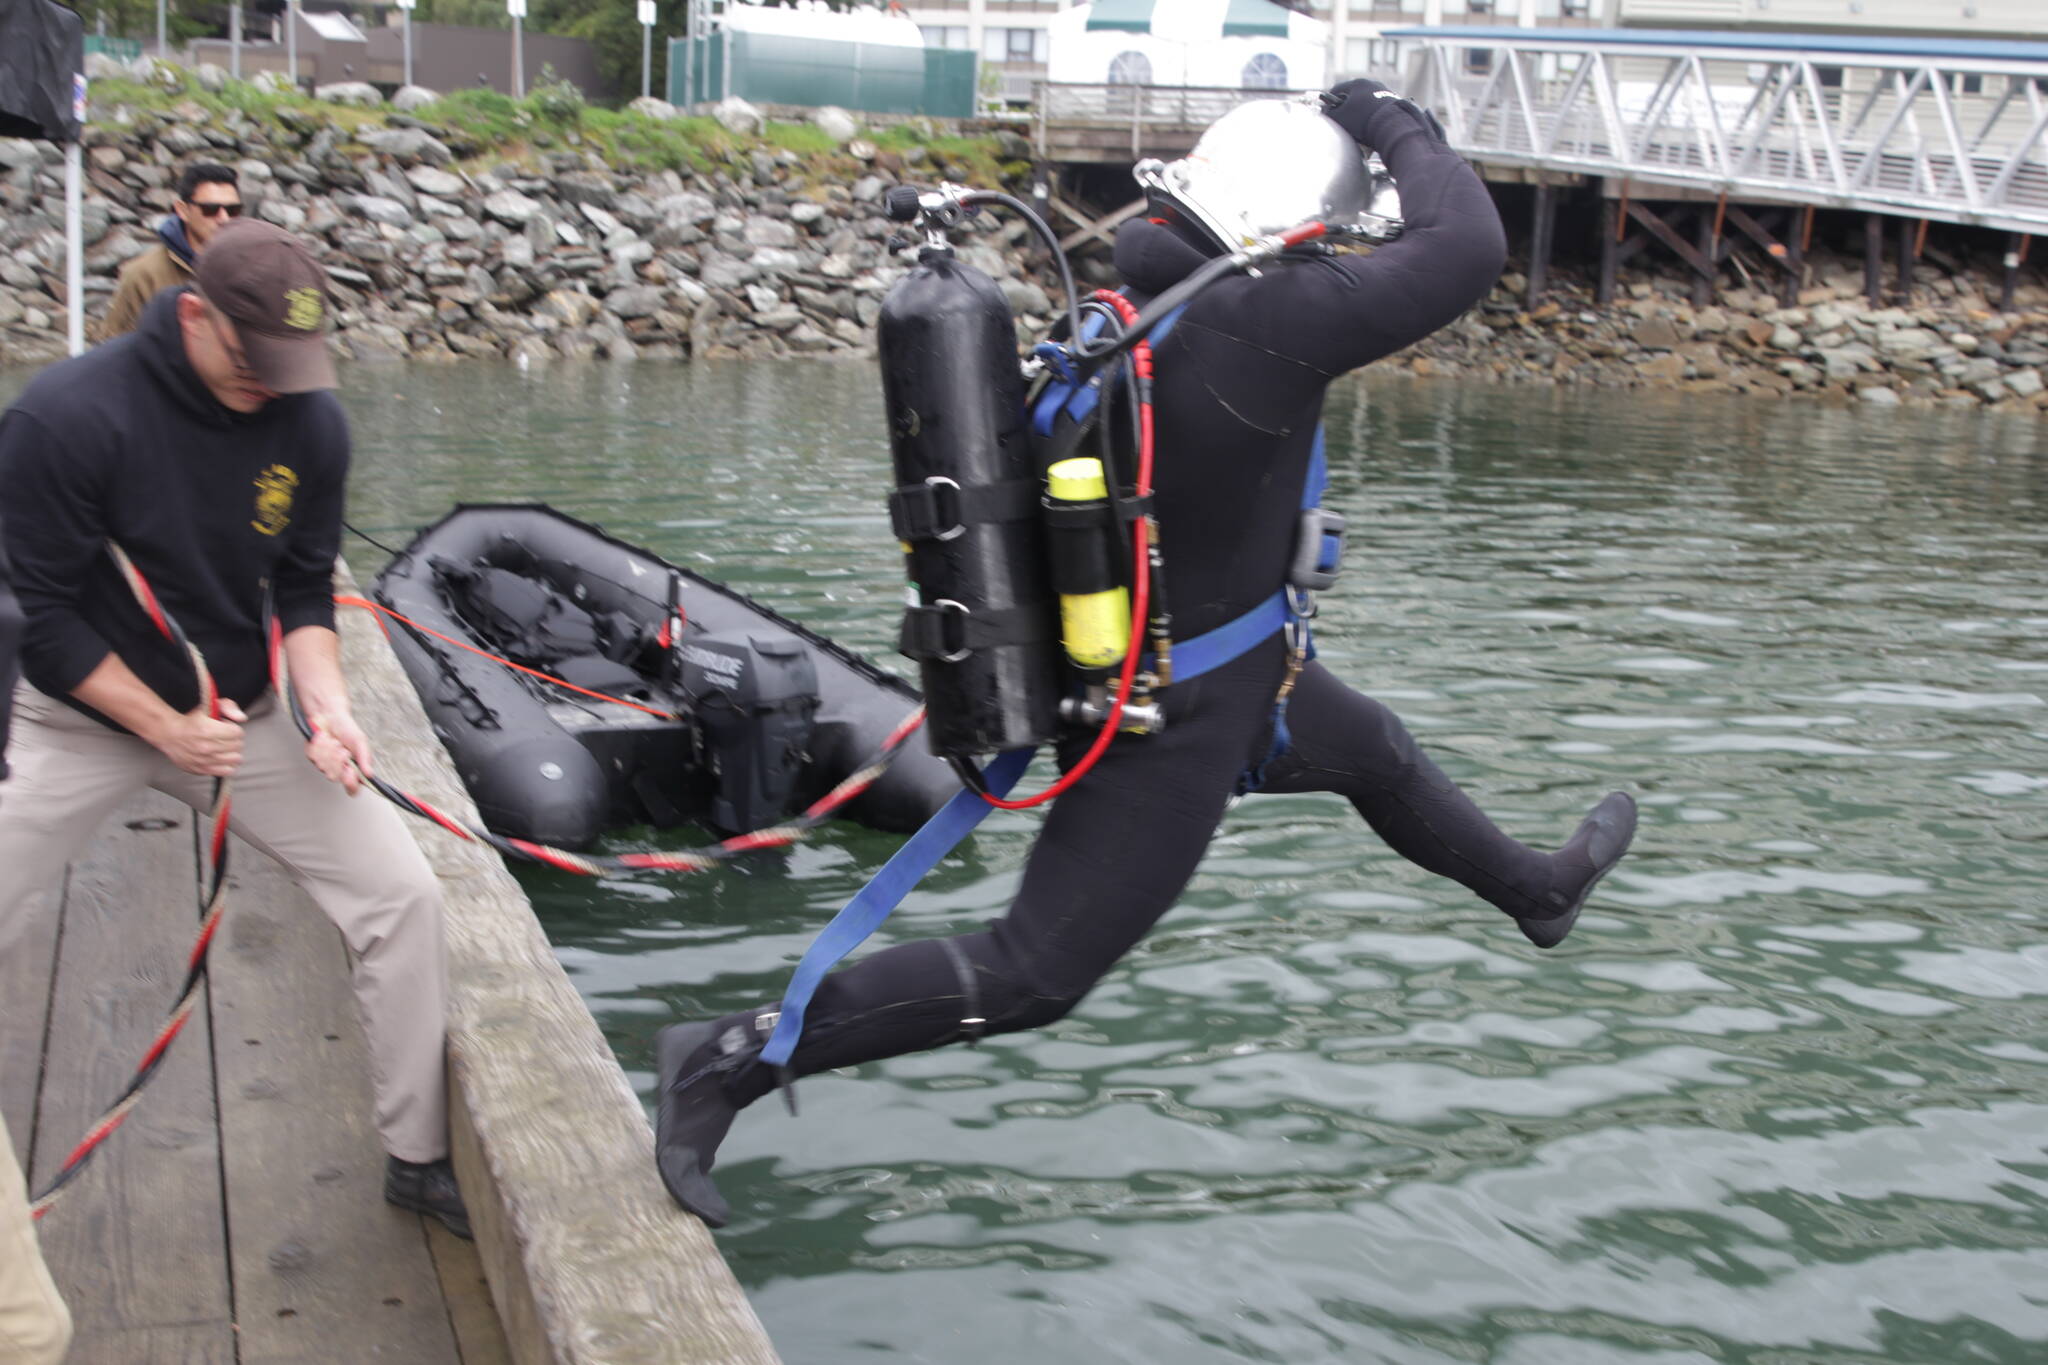 Army Pfc. Luke McCarty jumps in the water during training for the engineer divers with a Coast Guard dive team on Sept. 6, 2021. (Courtesy photo / MyKenzie Robertson)